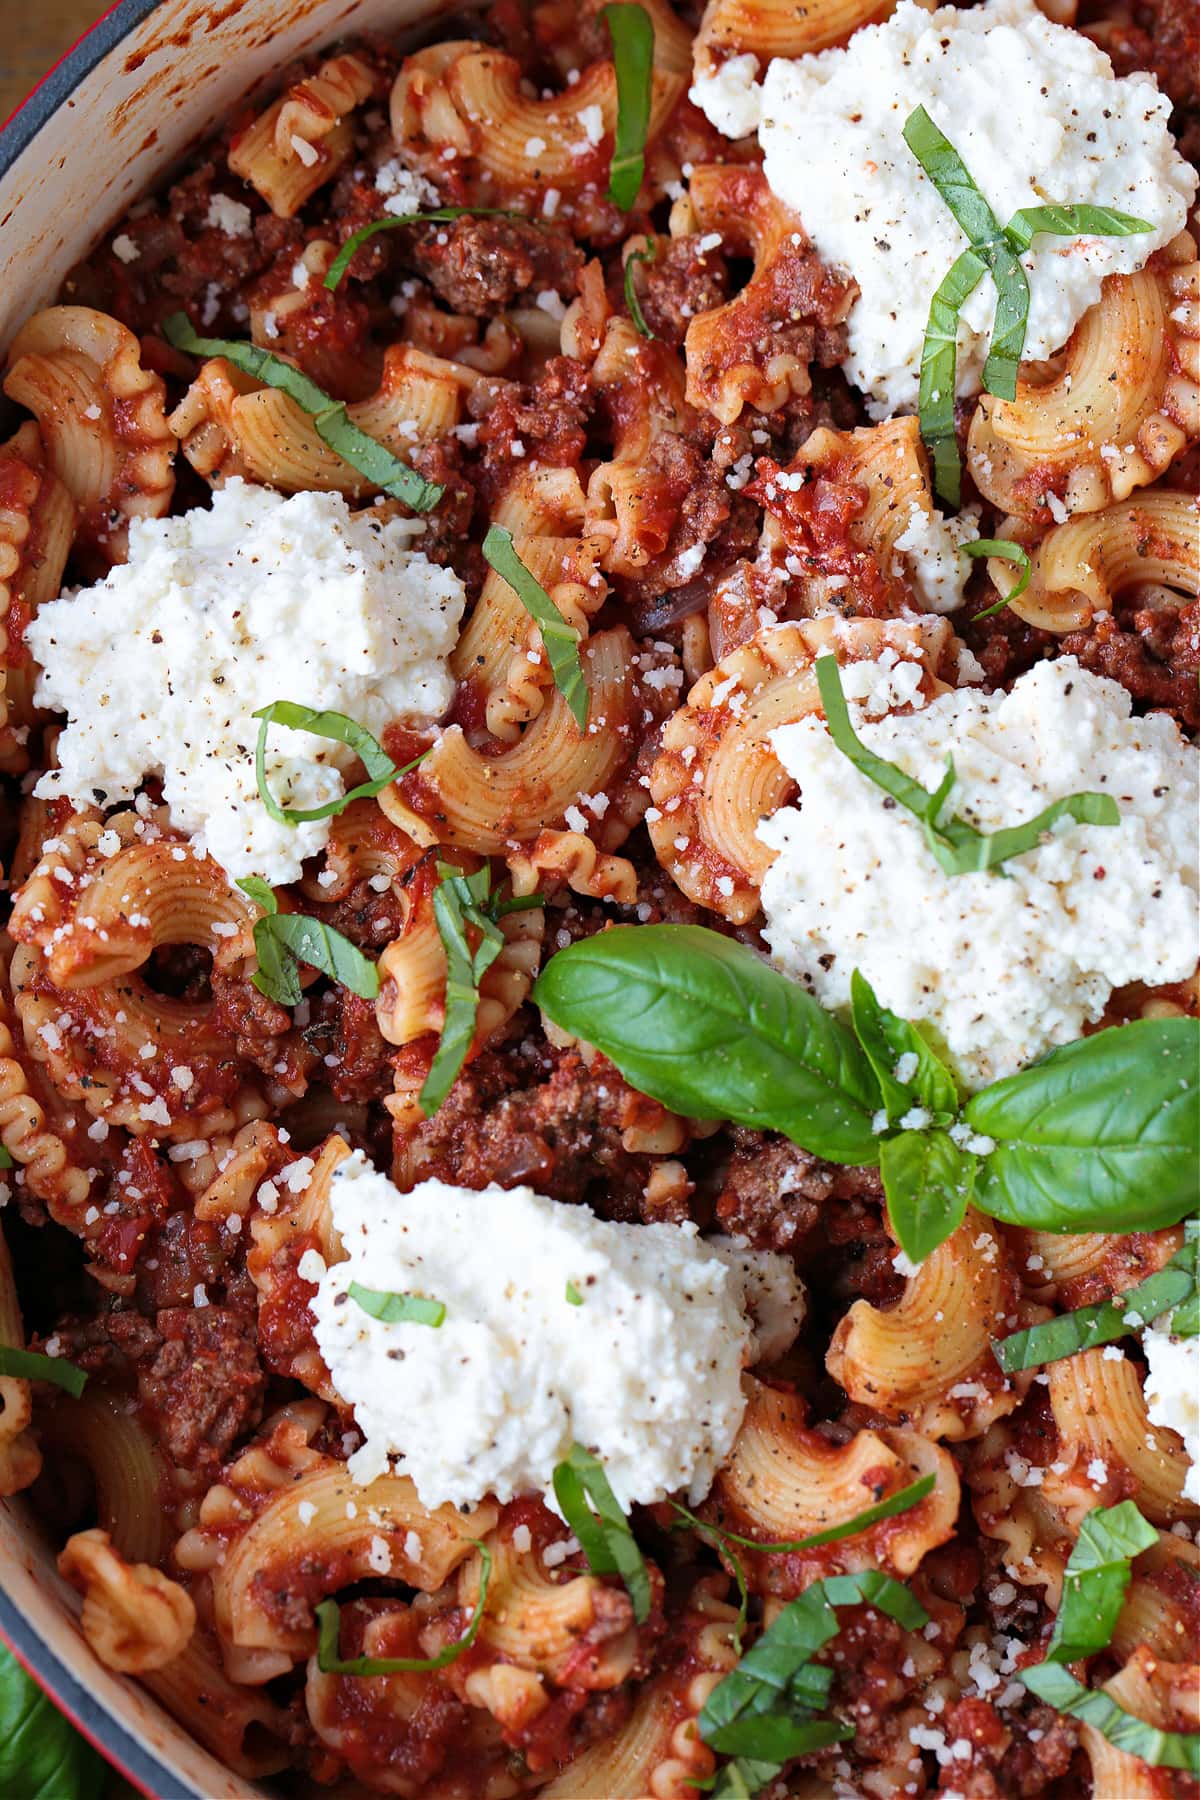 pasta recipe made with ground beef, tomato sauce and dollops of ricotta cheese